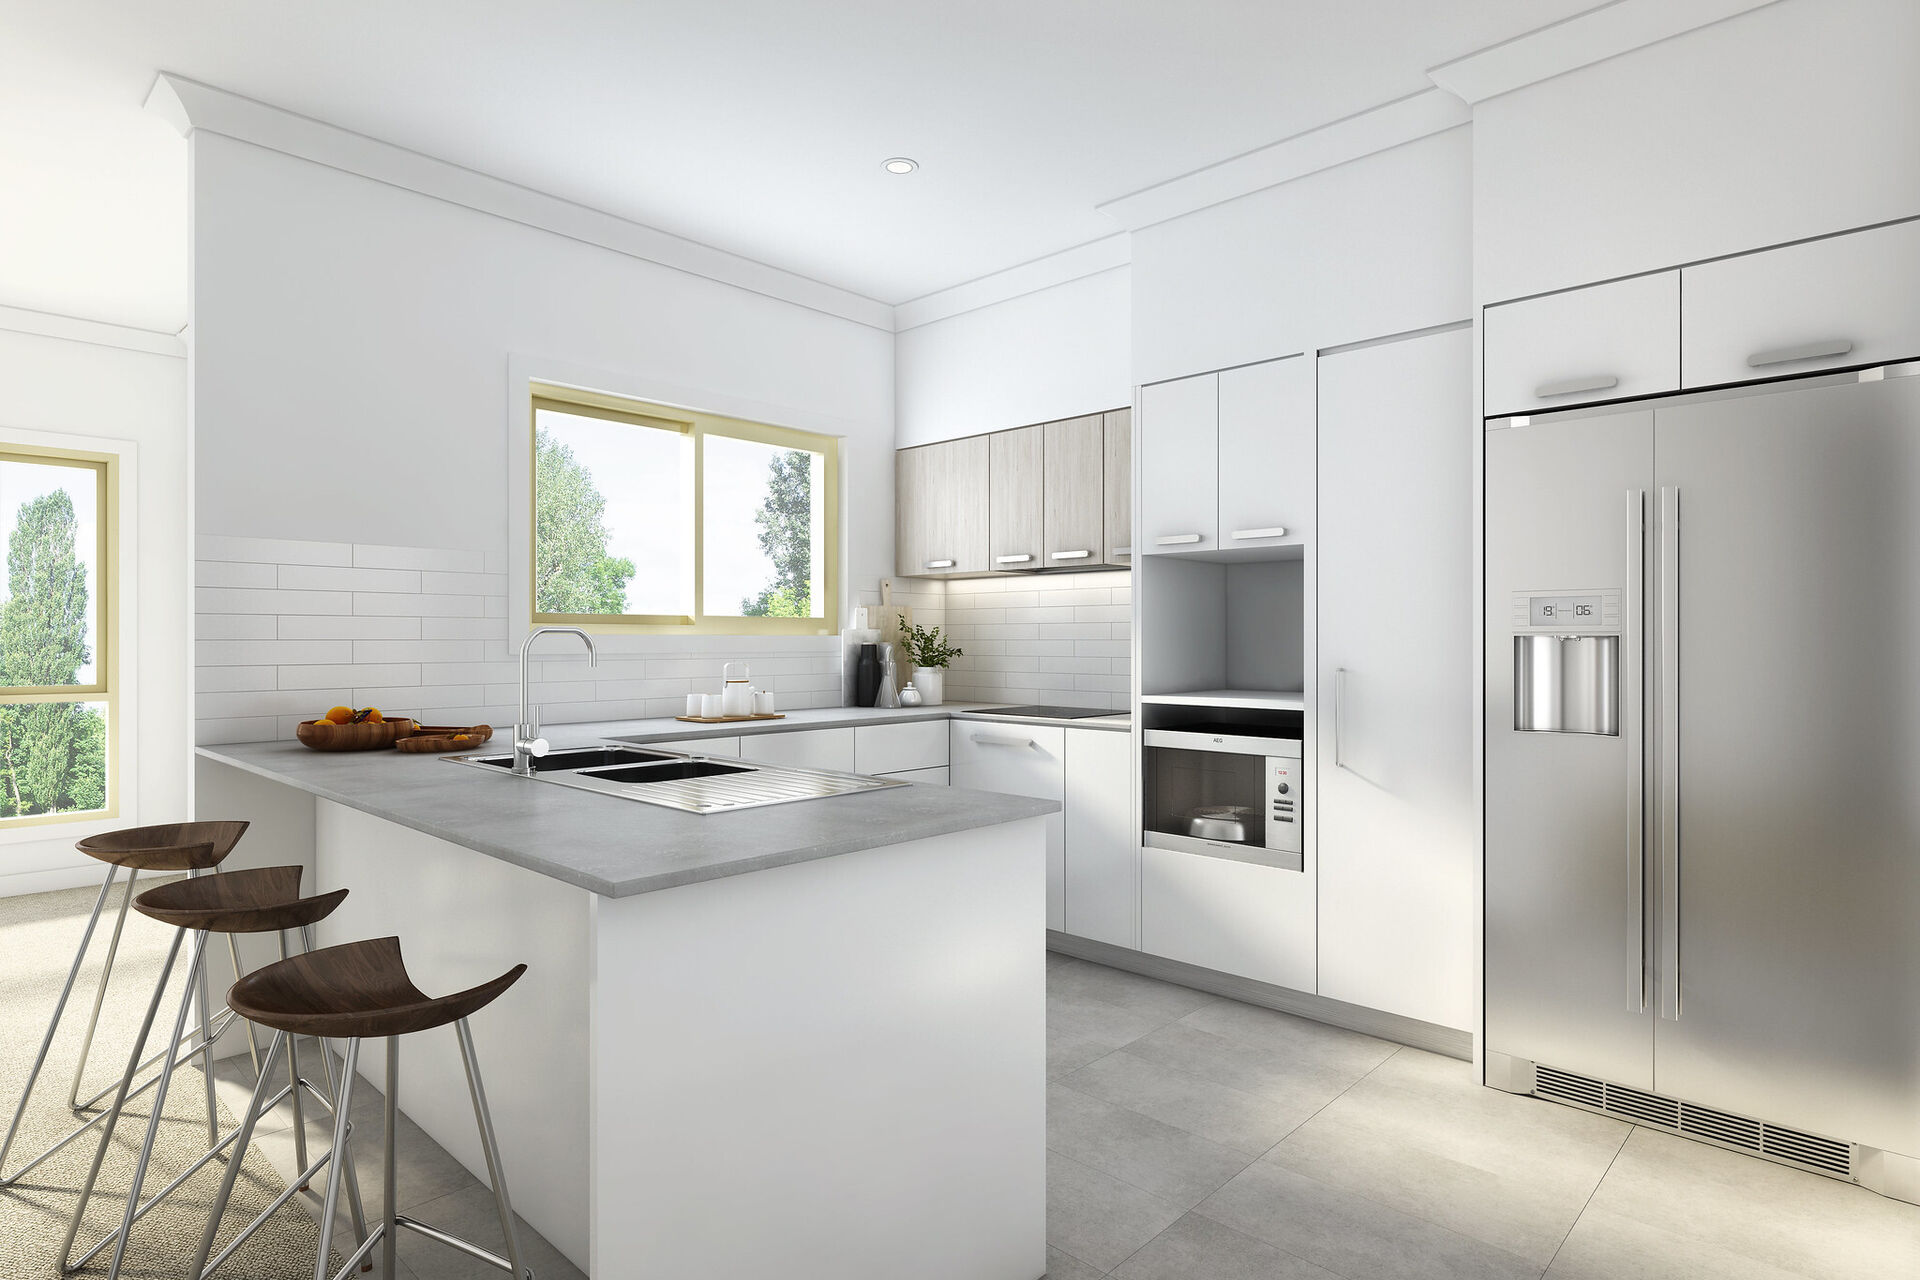 modern white kitchen of retirement village apartment baptistcare maranoa village in alstonville allowing over 55s to downsizing opportunities